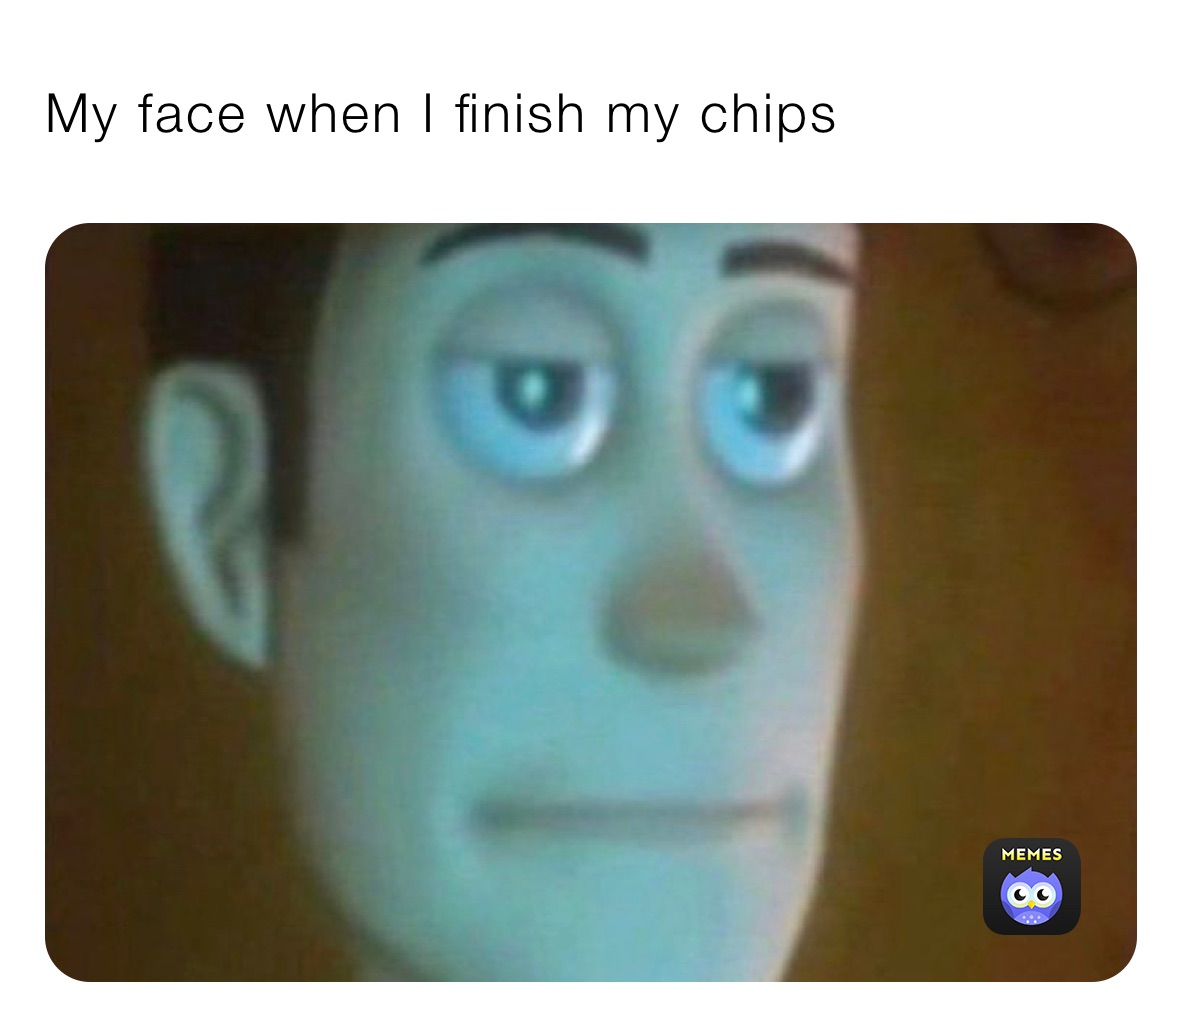 My face when I finish my chips